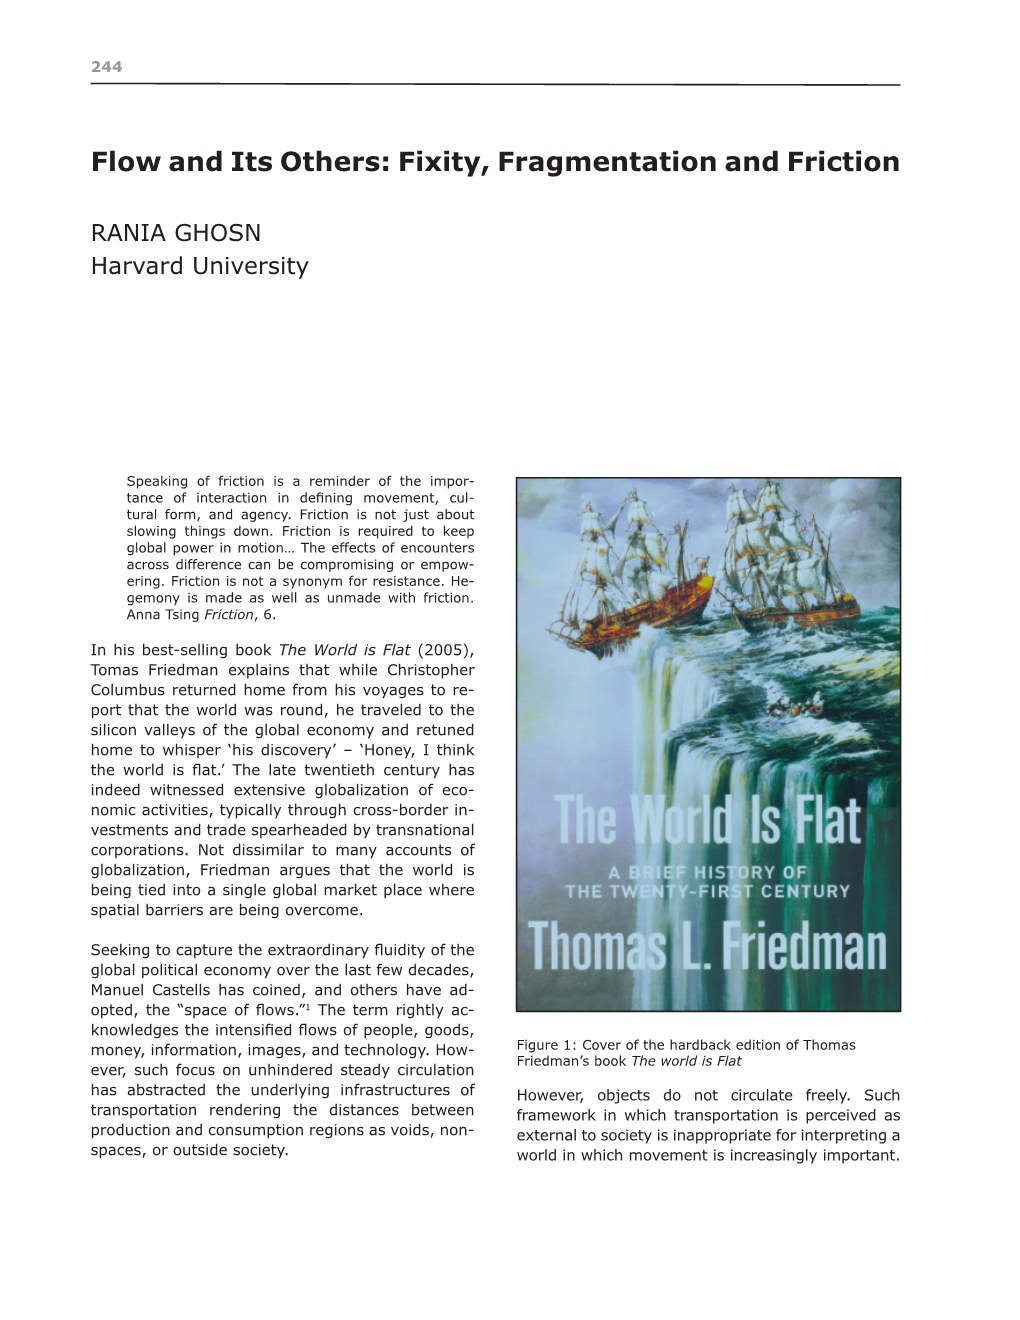 Flow and Its Others: Fixity, Fragmentation and Friction